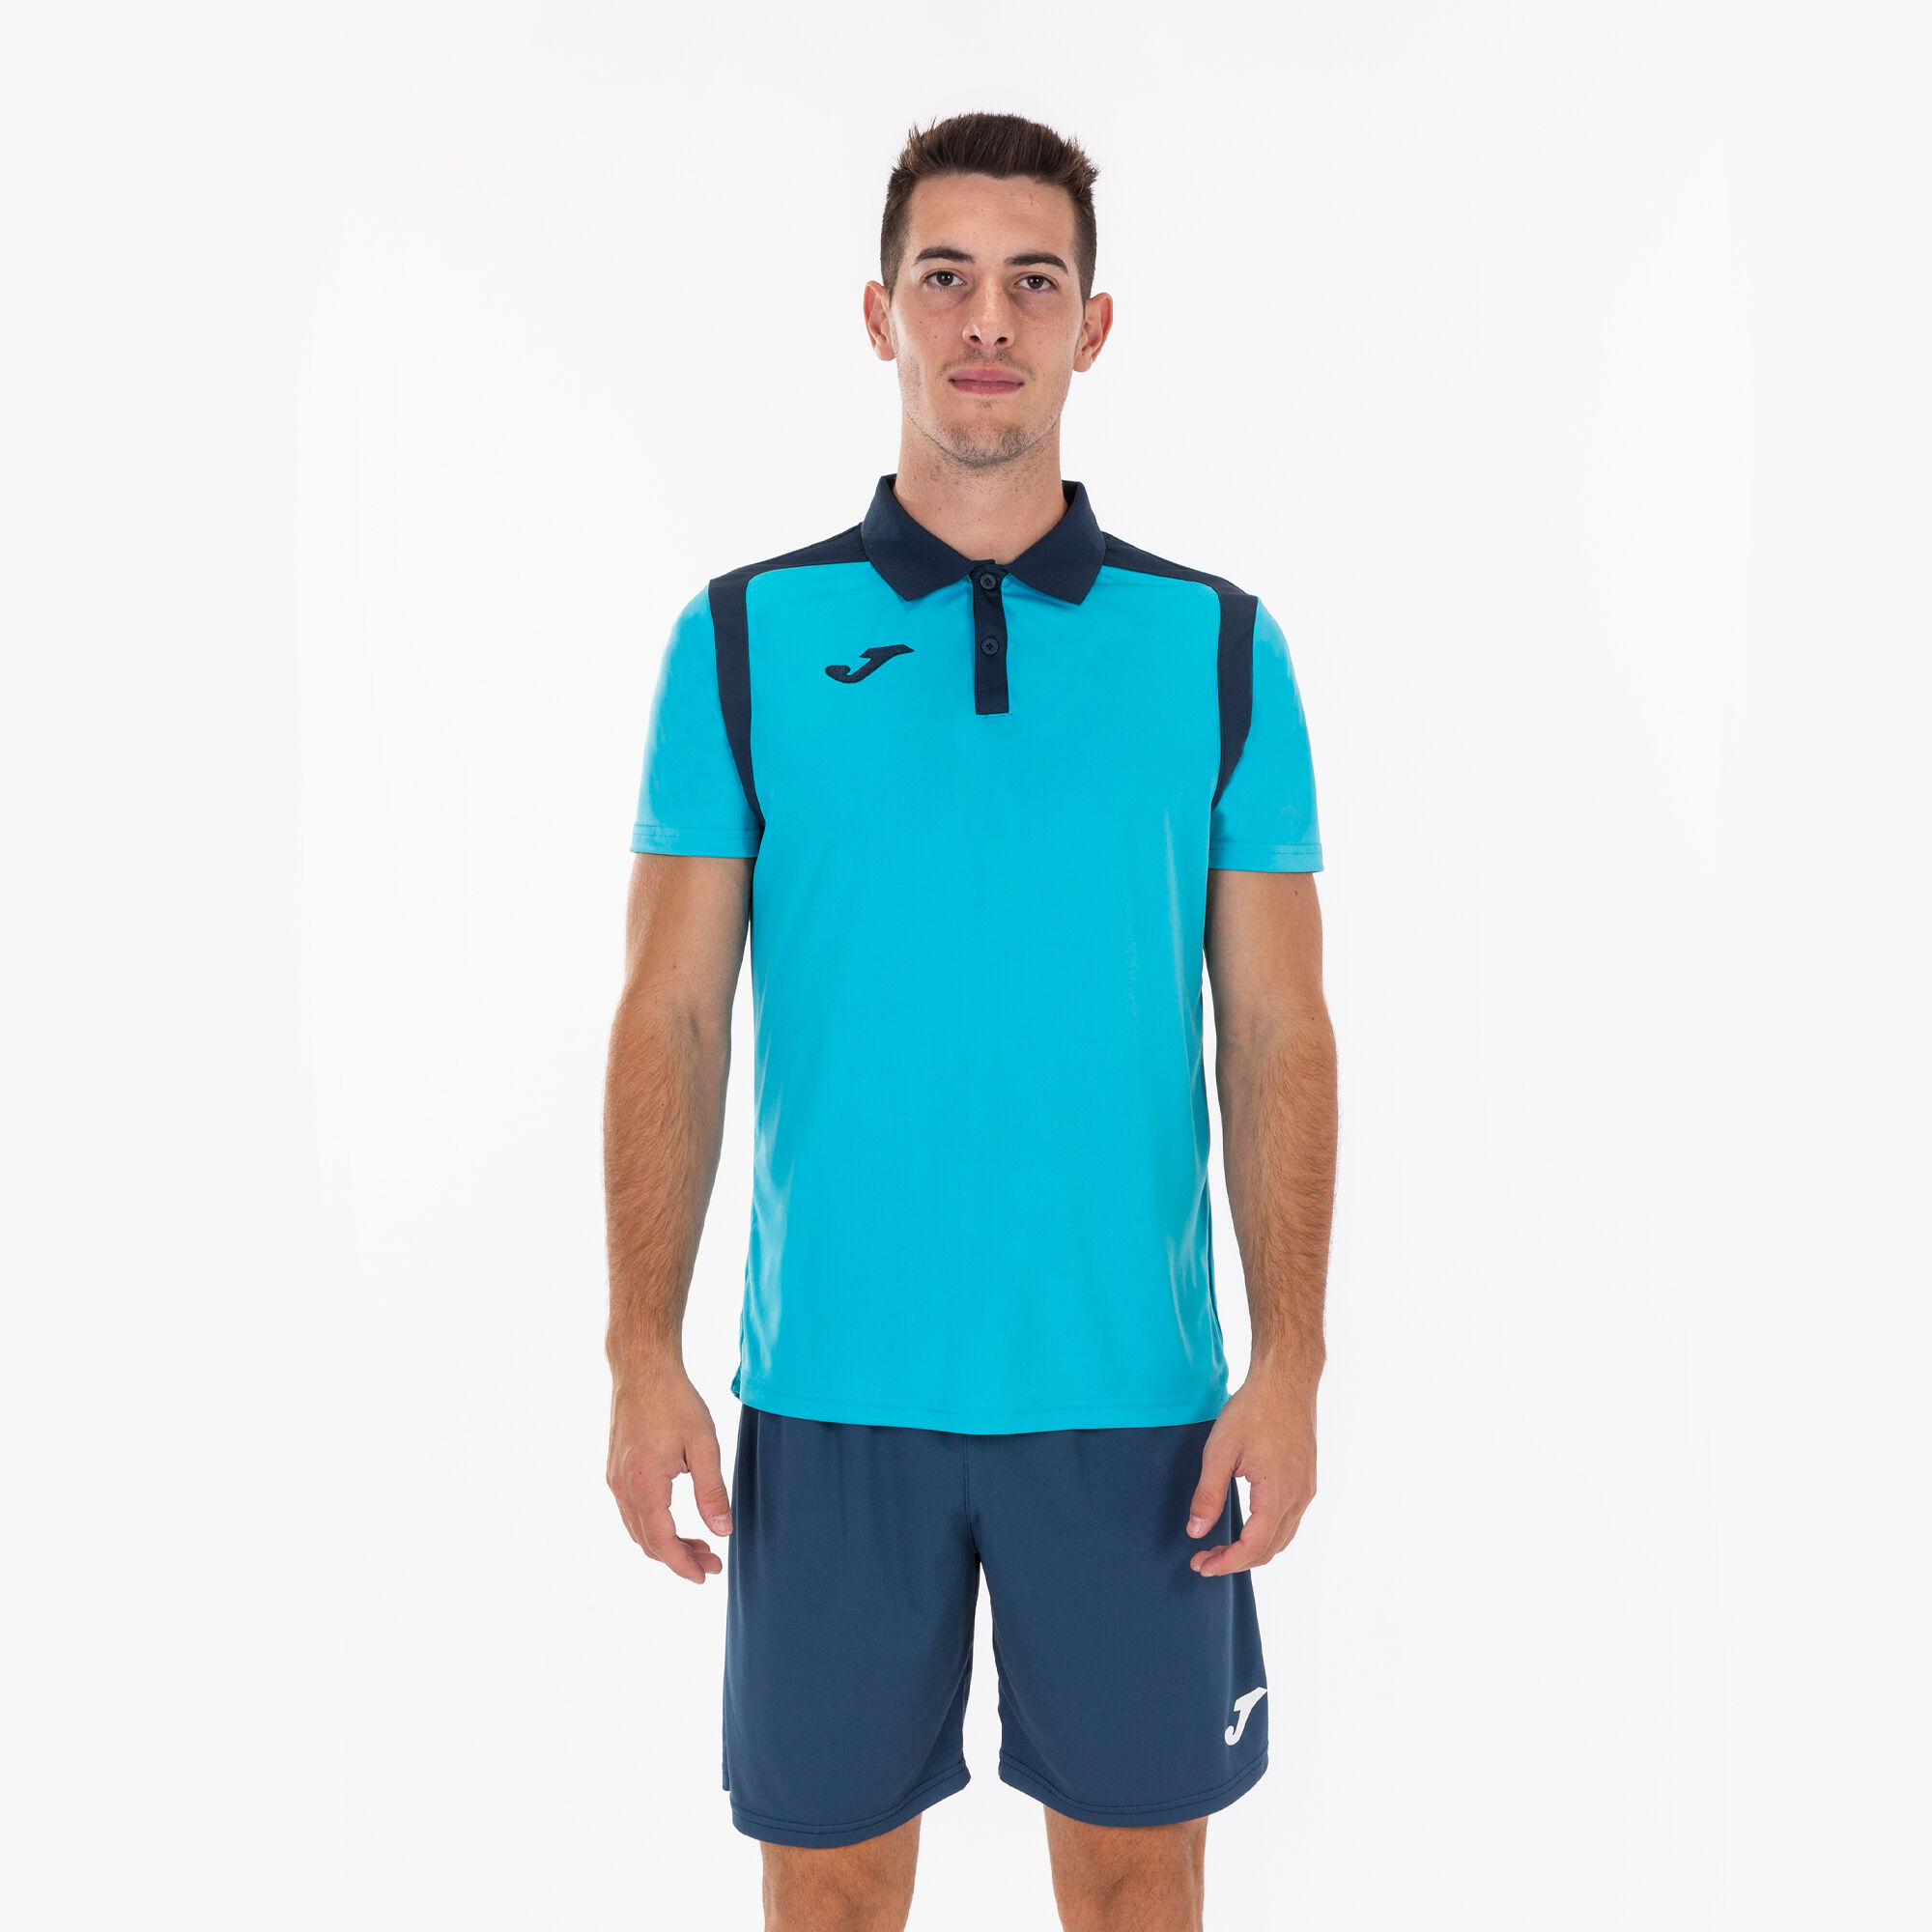 Polo manches courtes homme Championship V turquoise fluo bleu marine